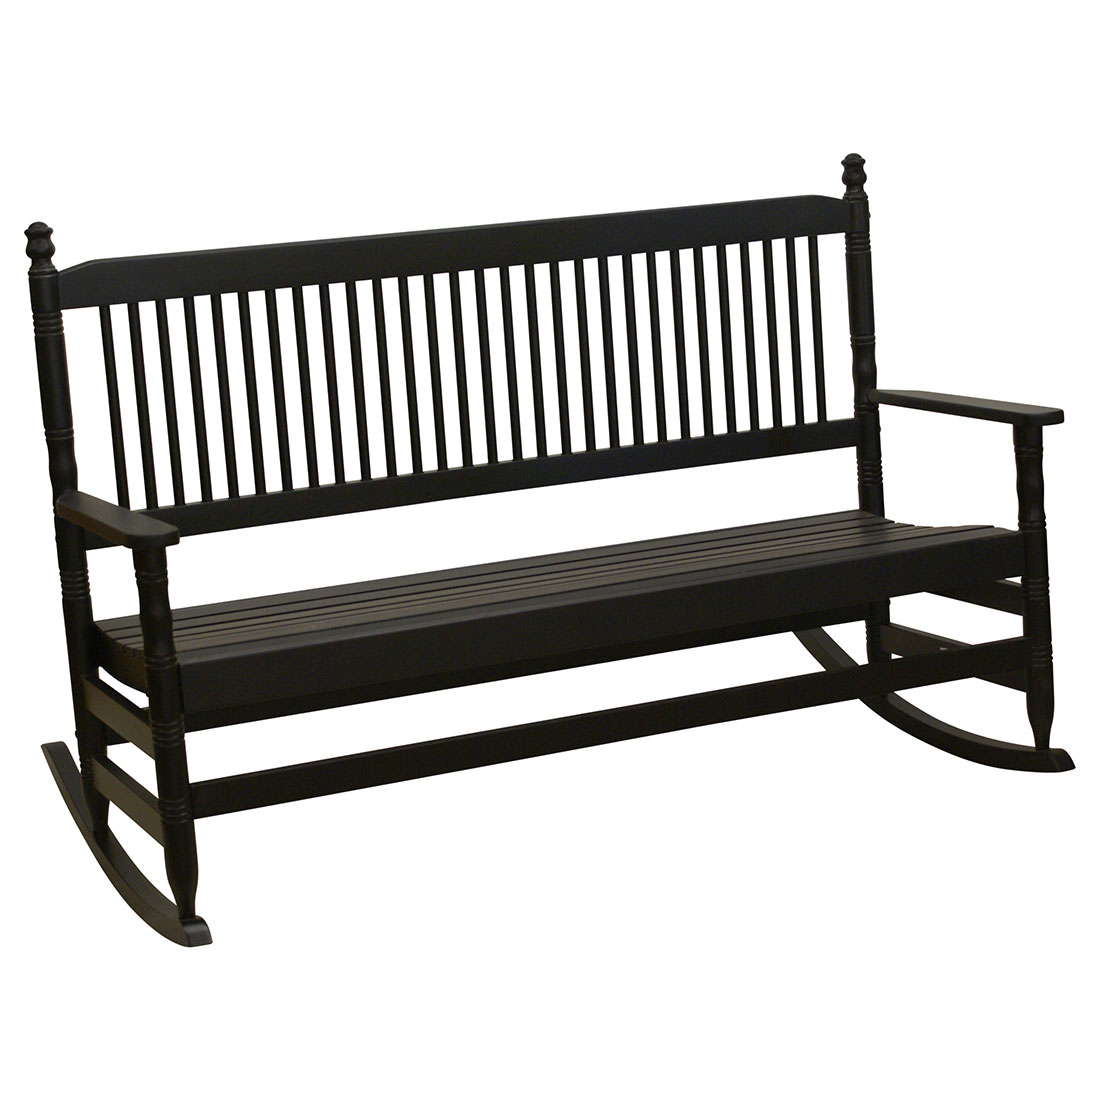 5 foot Bench With Runners - Black